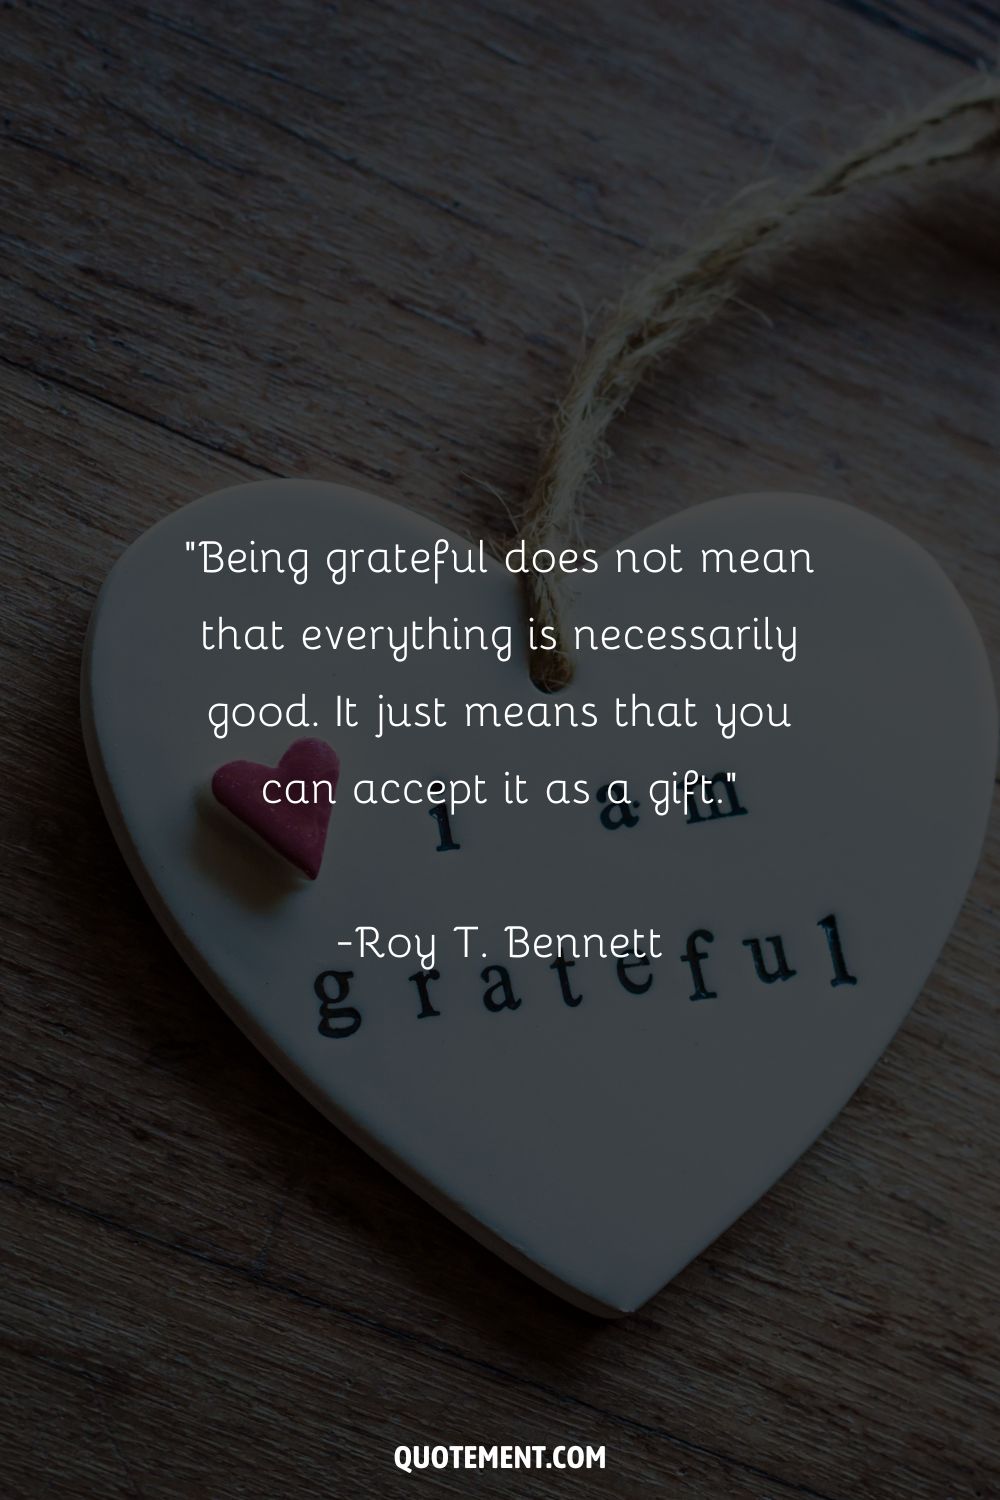 Being grateful does not mean that everything is necessarily good